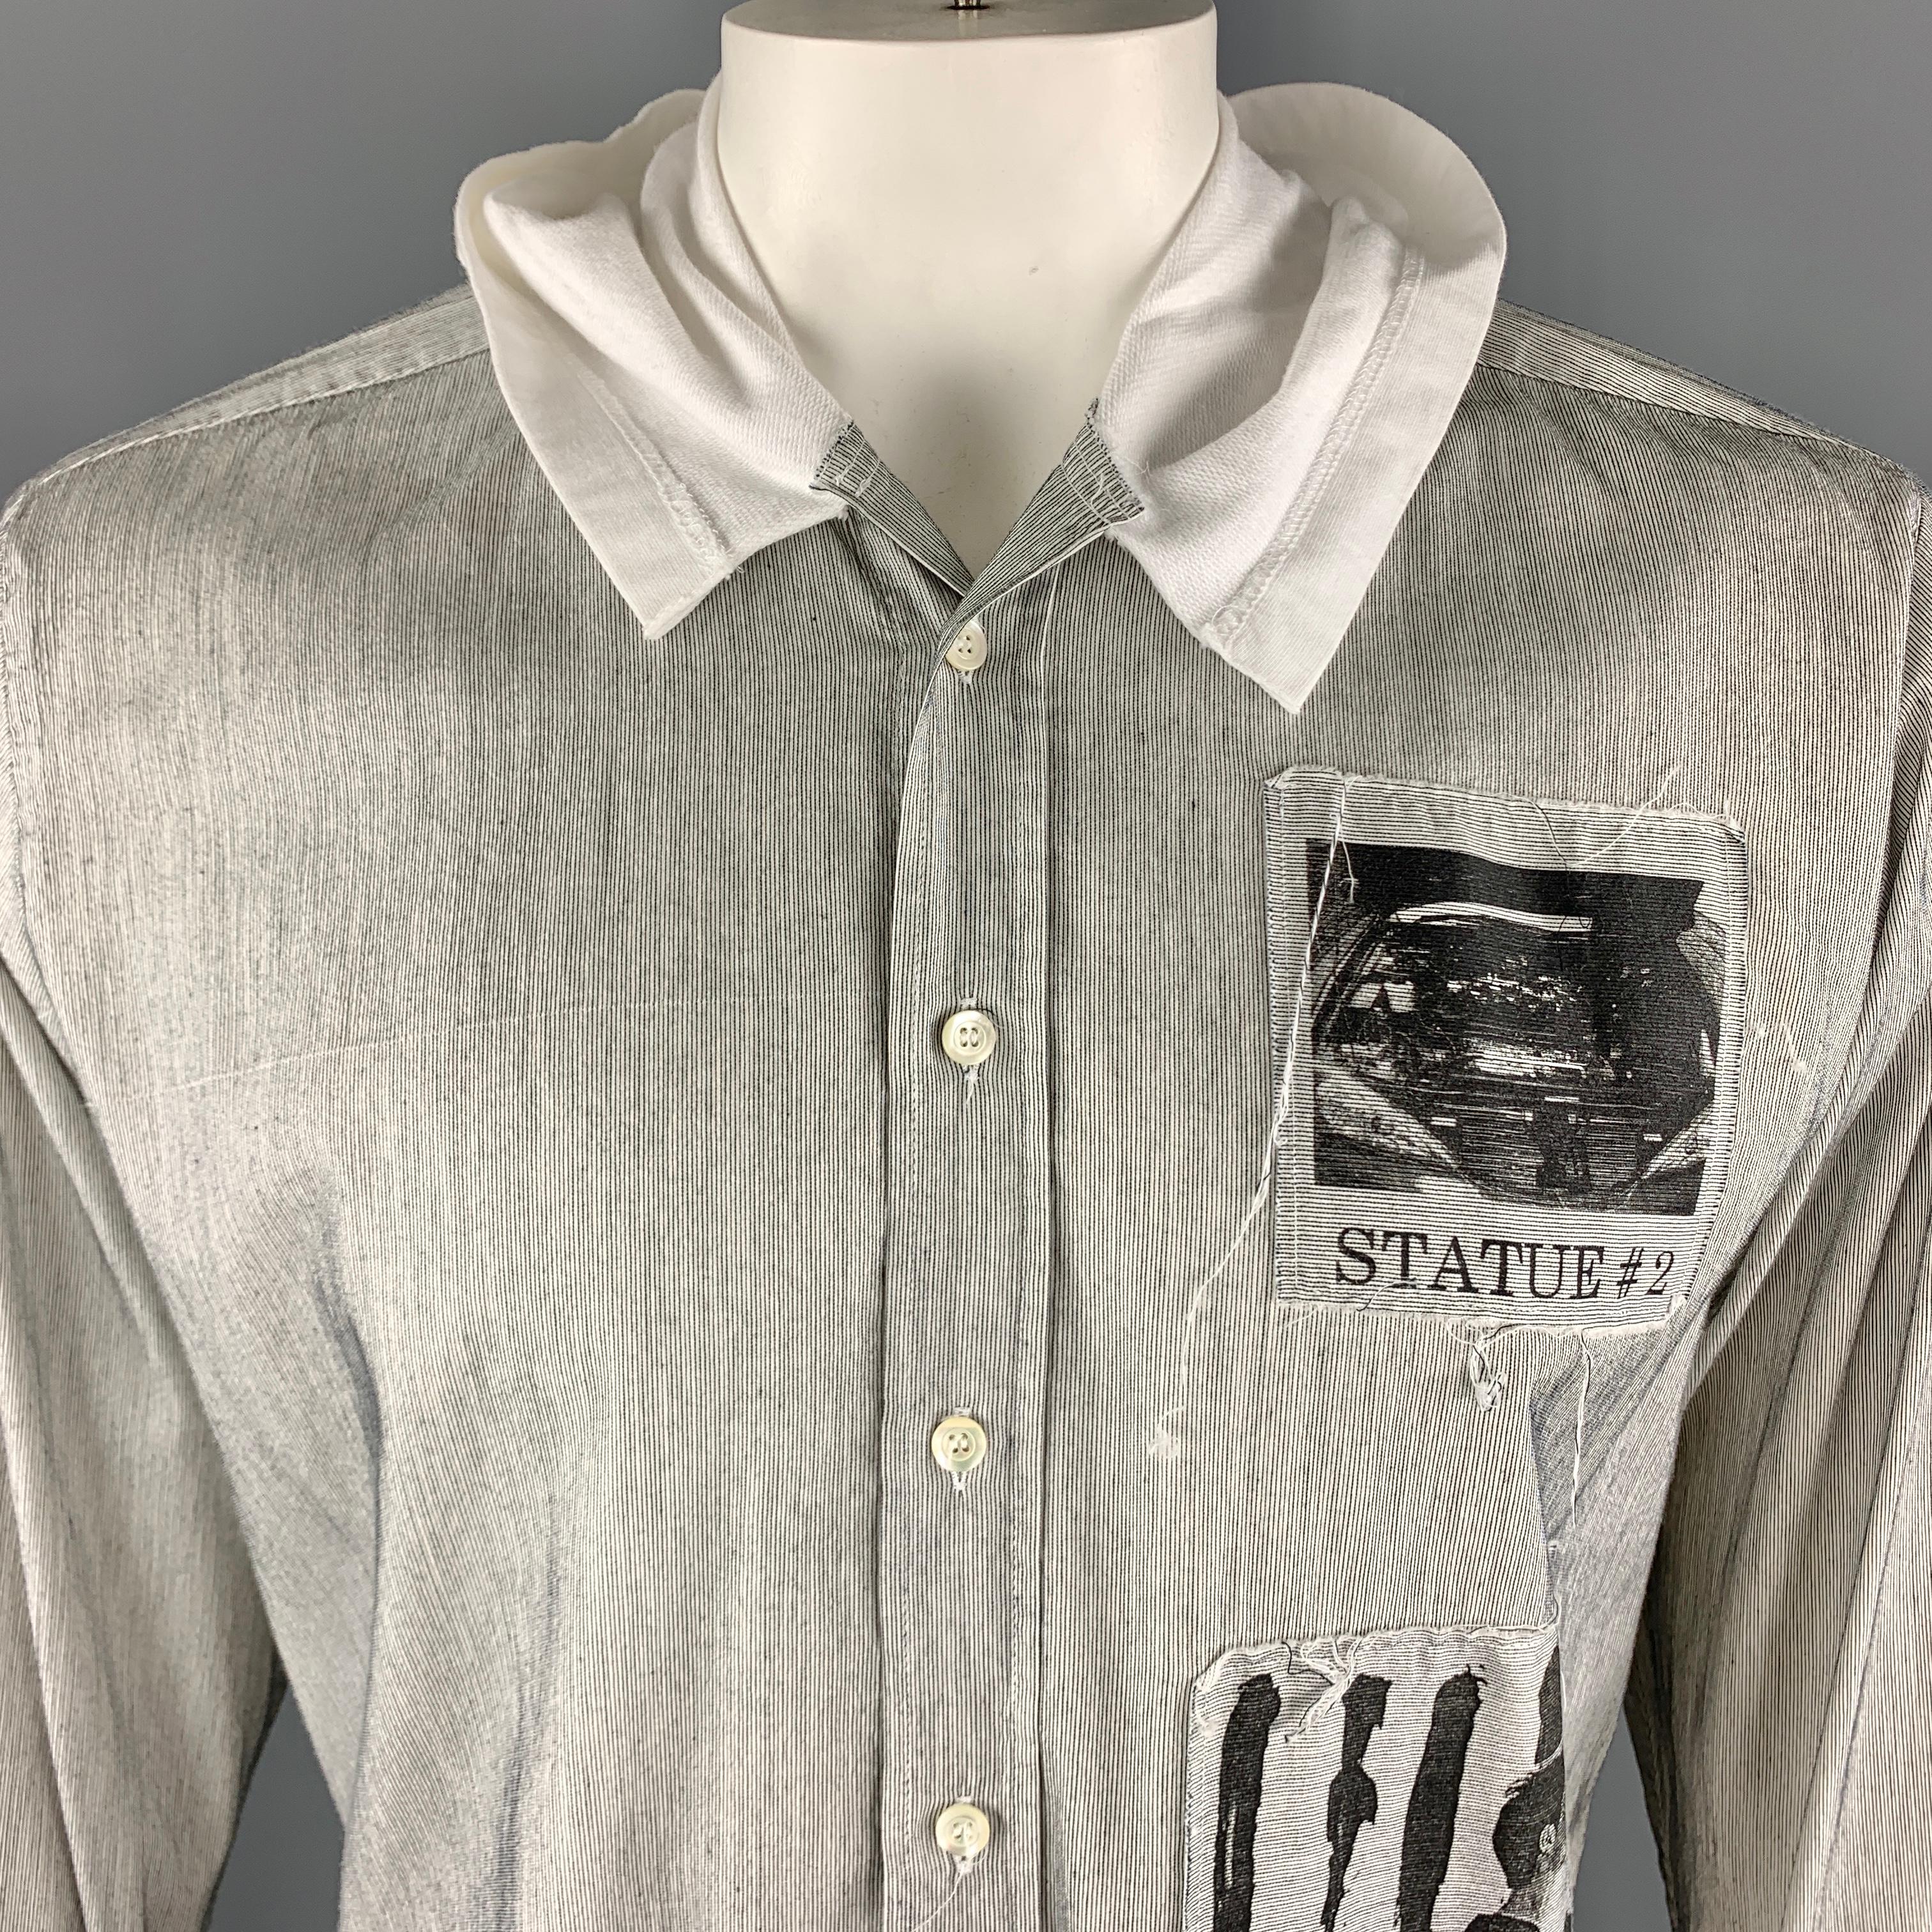 RAF by RAF SIMONS Long Sleeve Shirt comes in black and white pinstripe cotton material, featuring a white hood, a buttoned front, graphics at patches, a Statue # 2 graphic, and buttoned cuffs. Made in Italy.

Excellent Pre-Owned Condition.
Marked: